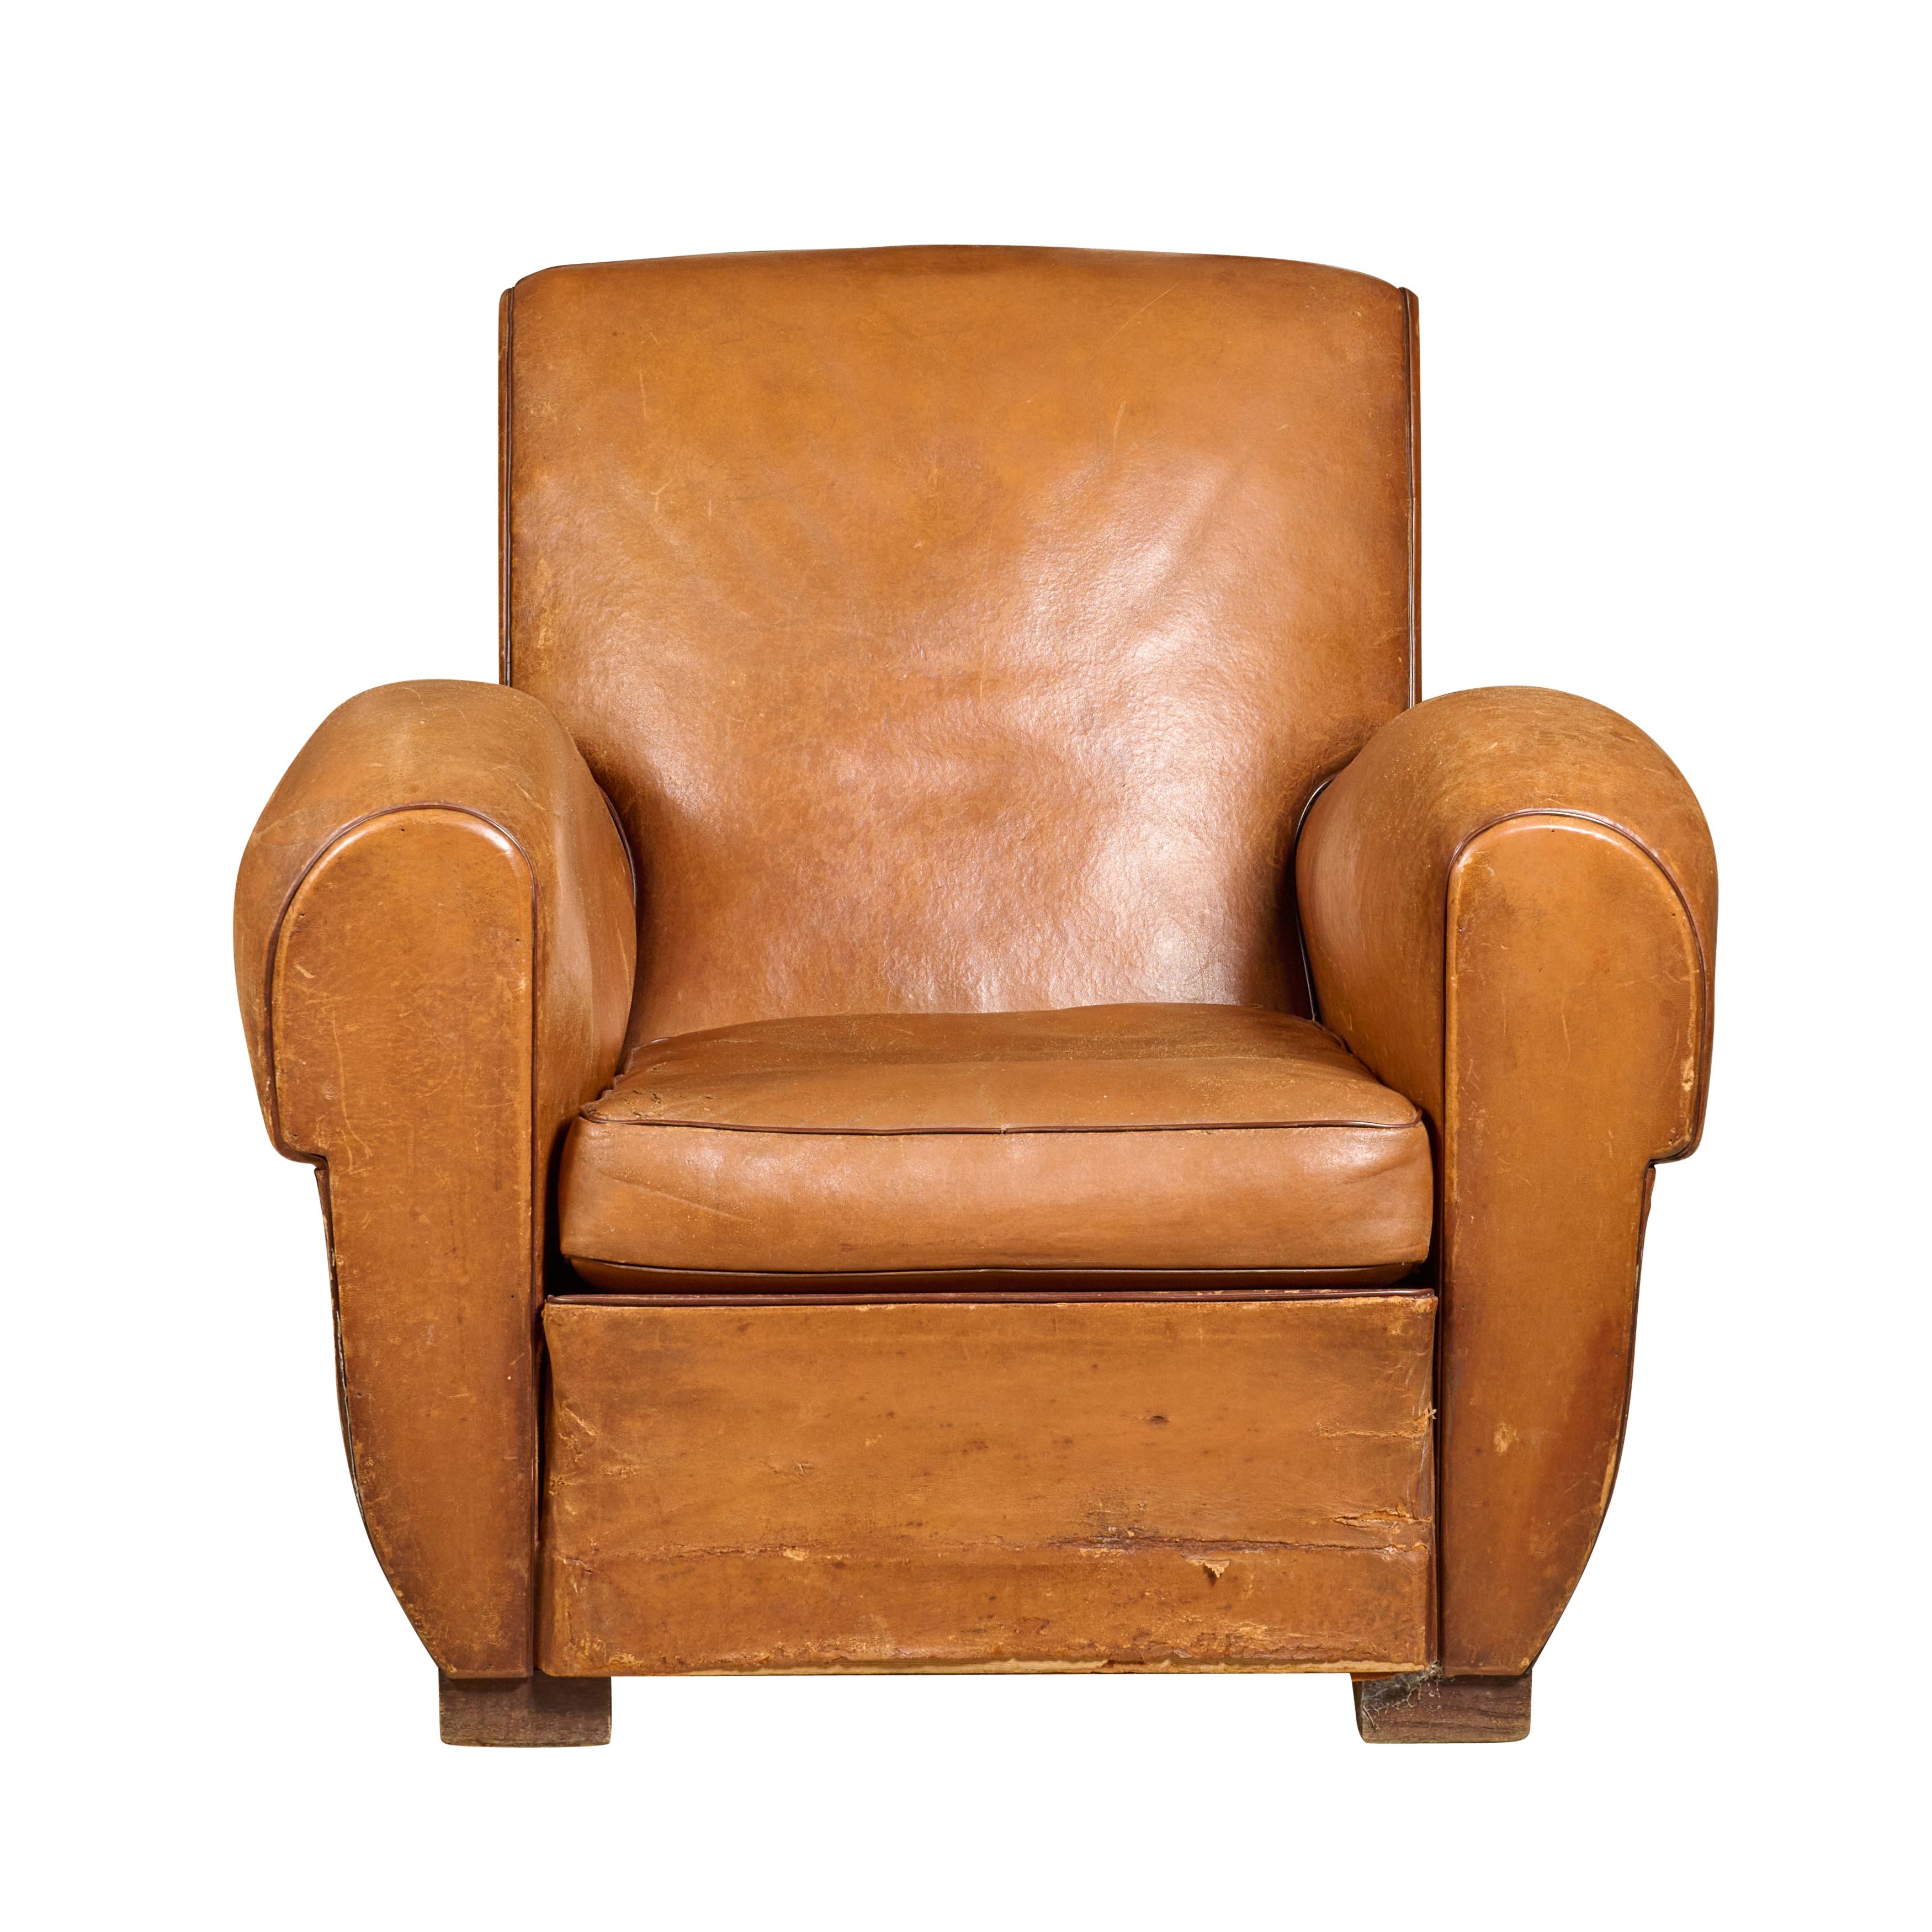 Leather club chair. Great design.